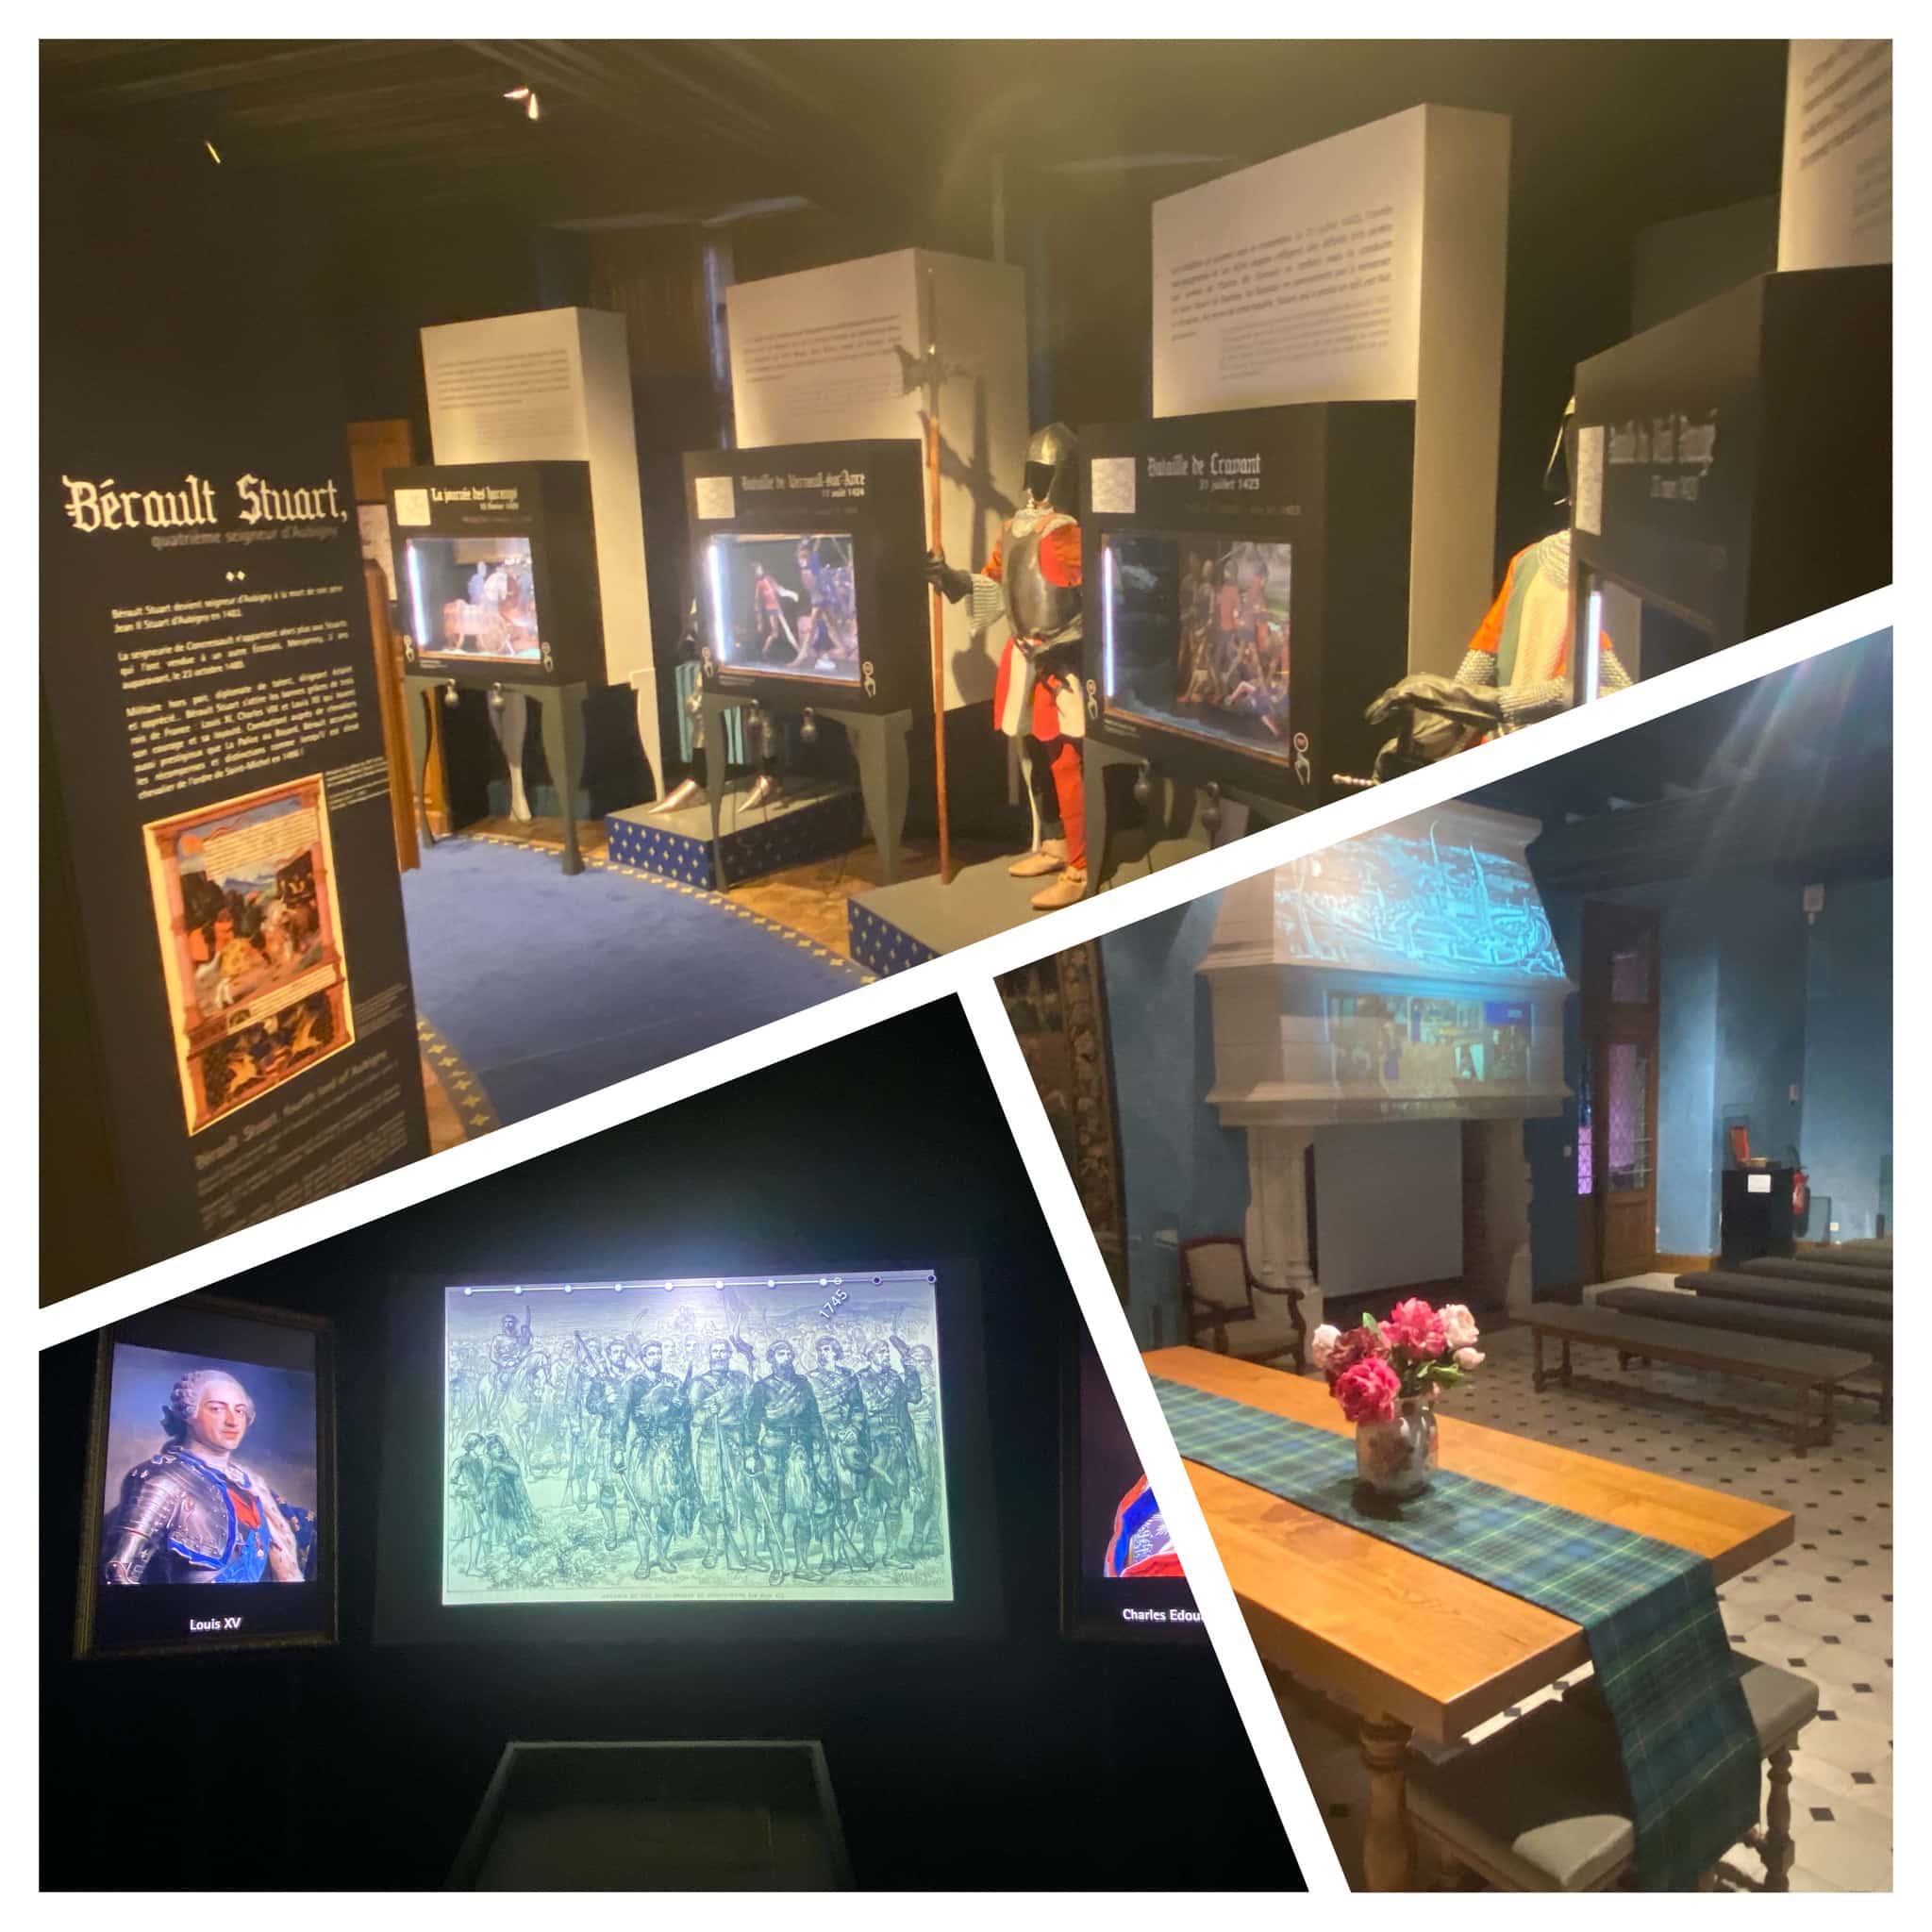 images of interactive screens and films in a museum